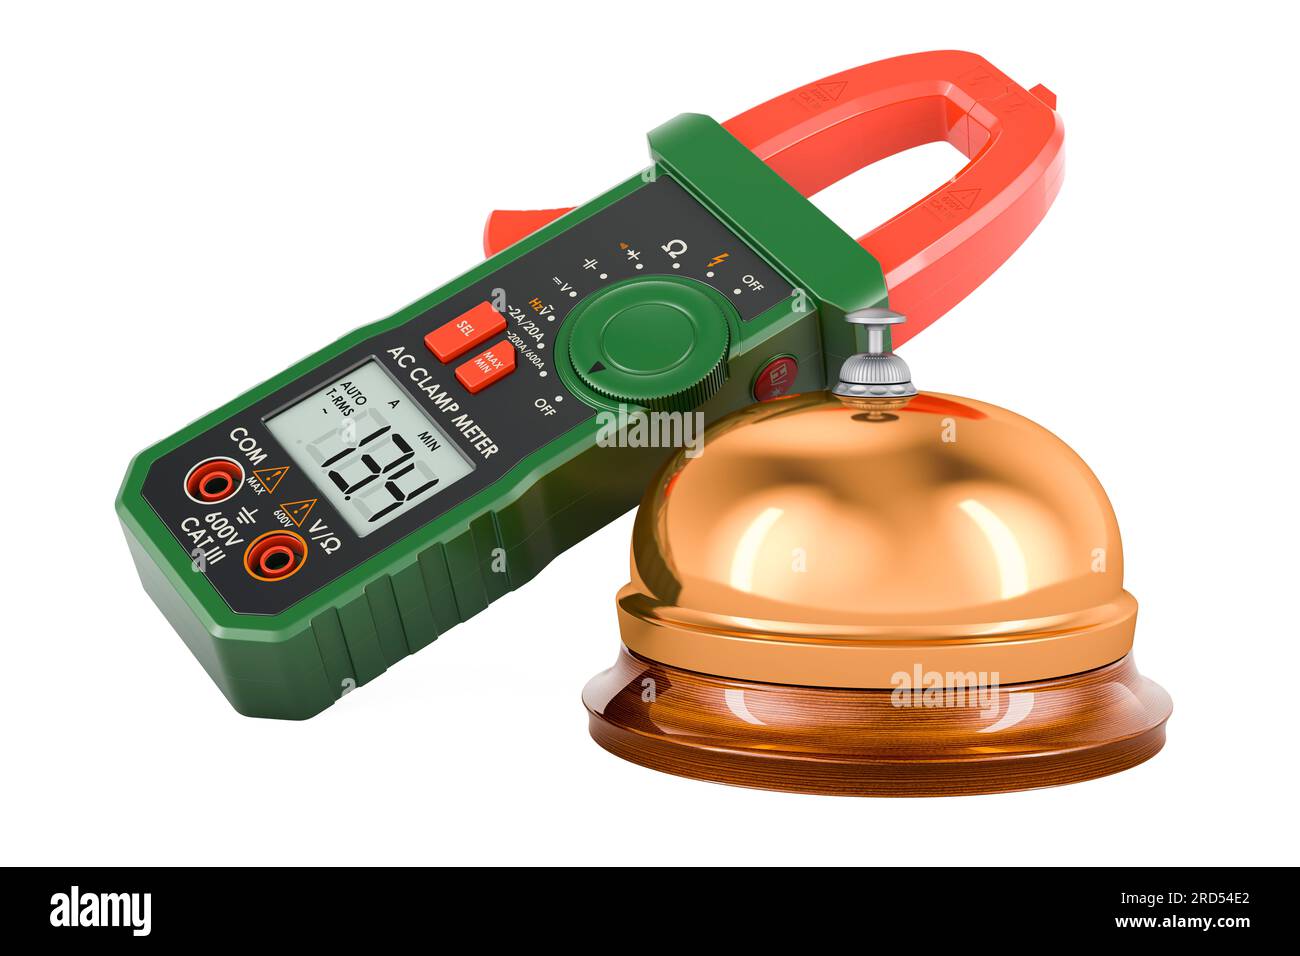 https://c8.alamy.com/comp/2RD54E2/digital-multimeter-with-reception-bell-3d-rendering-isolated-on-white-background-2RD54E2.jpg